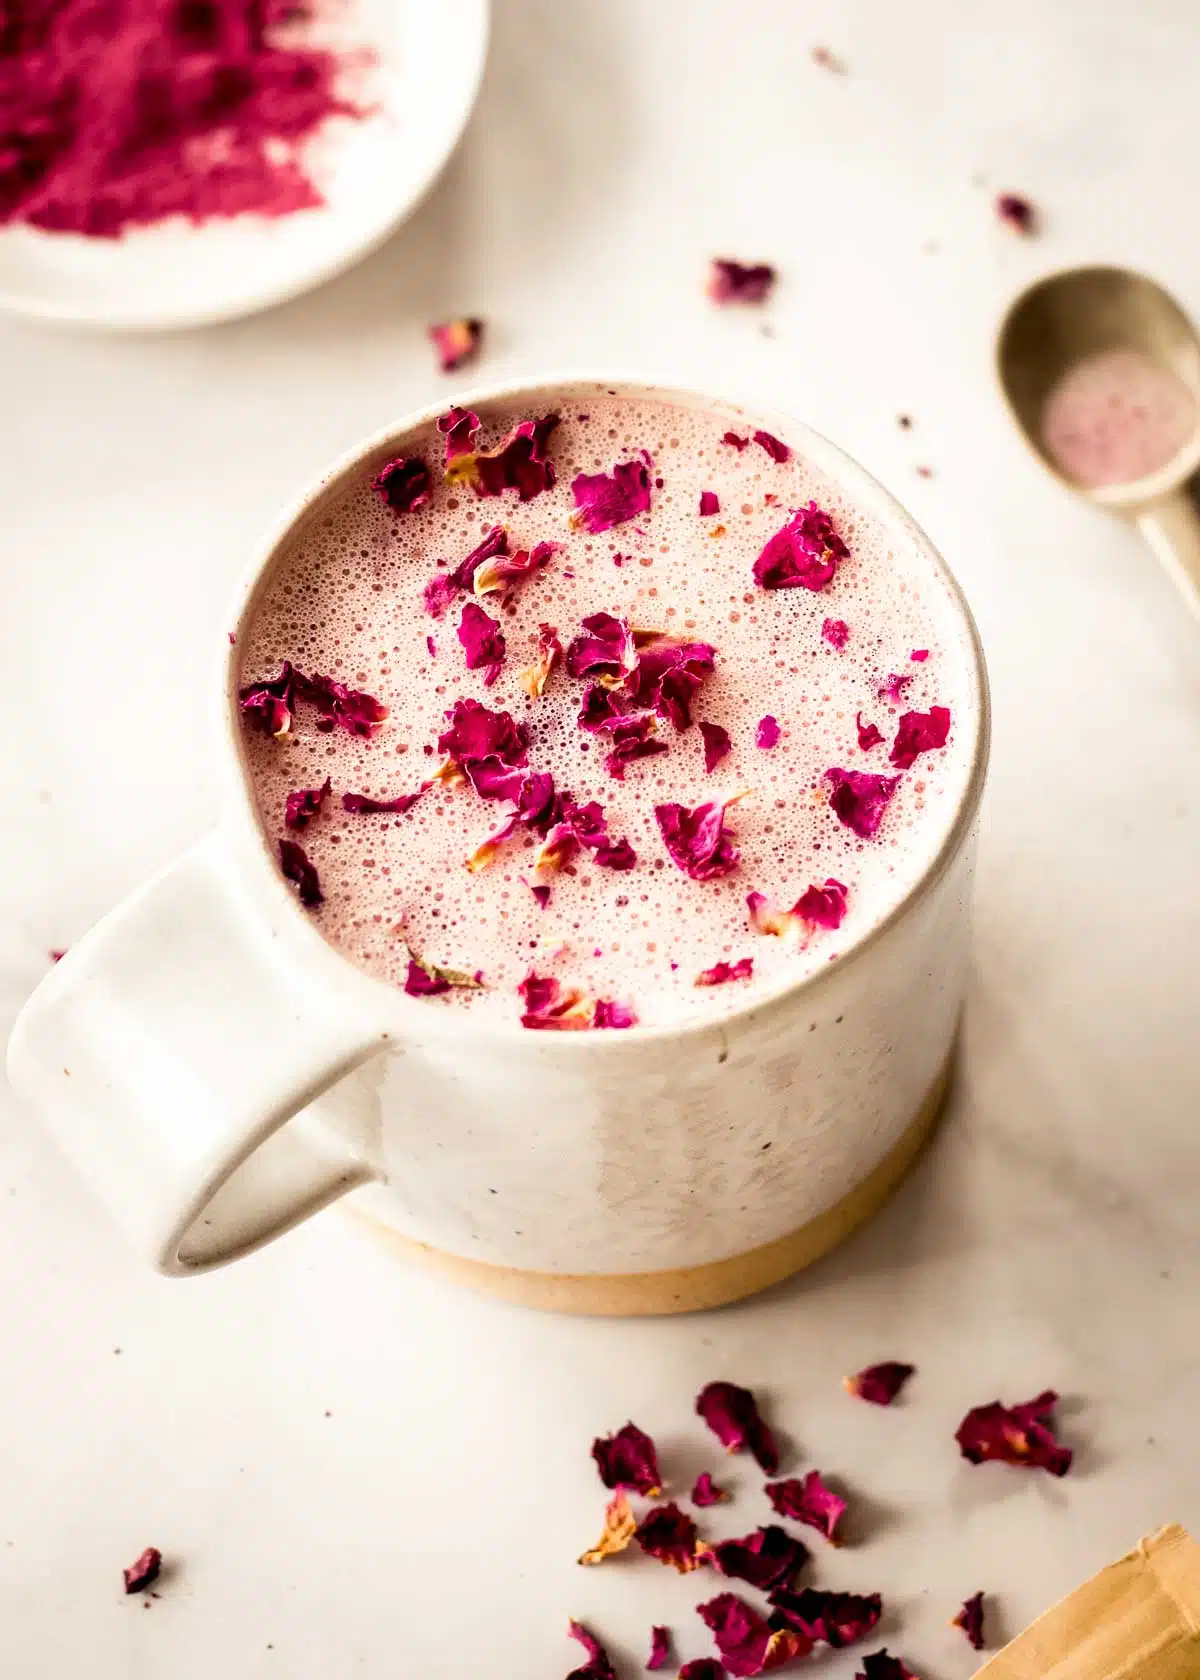 A cream coloured mug of pink latte sits on a saucer on a white marble table, decorated with pink rose petals. A dish of beet powder and a spoon sit in the background.